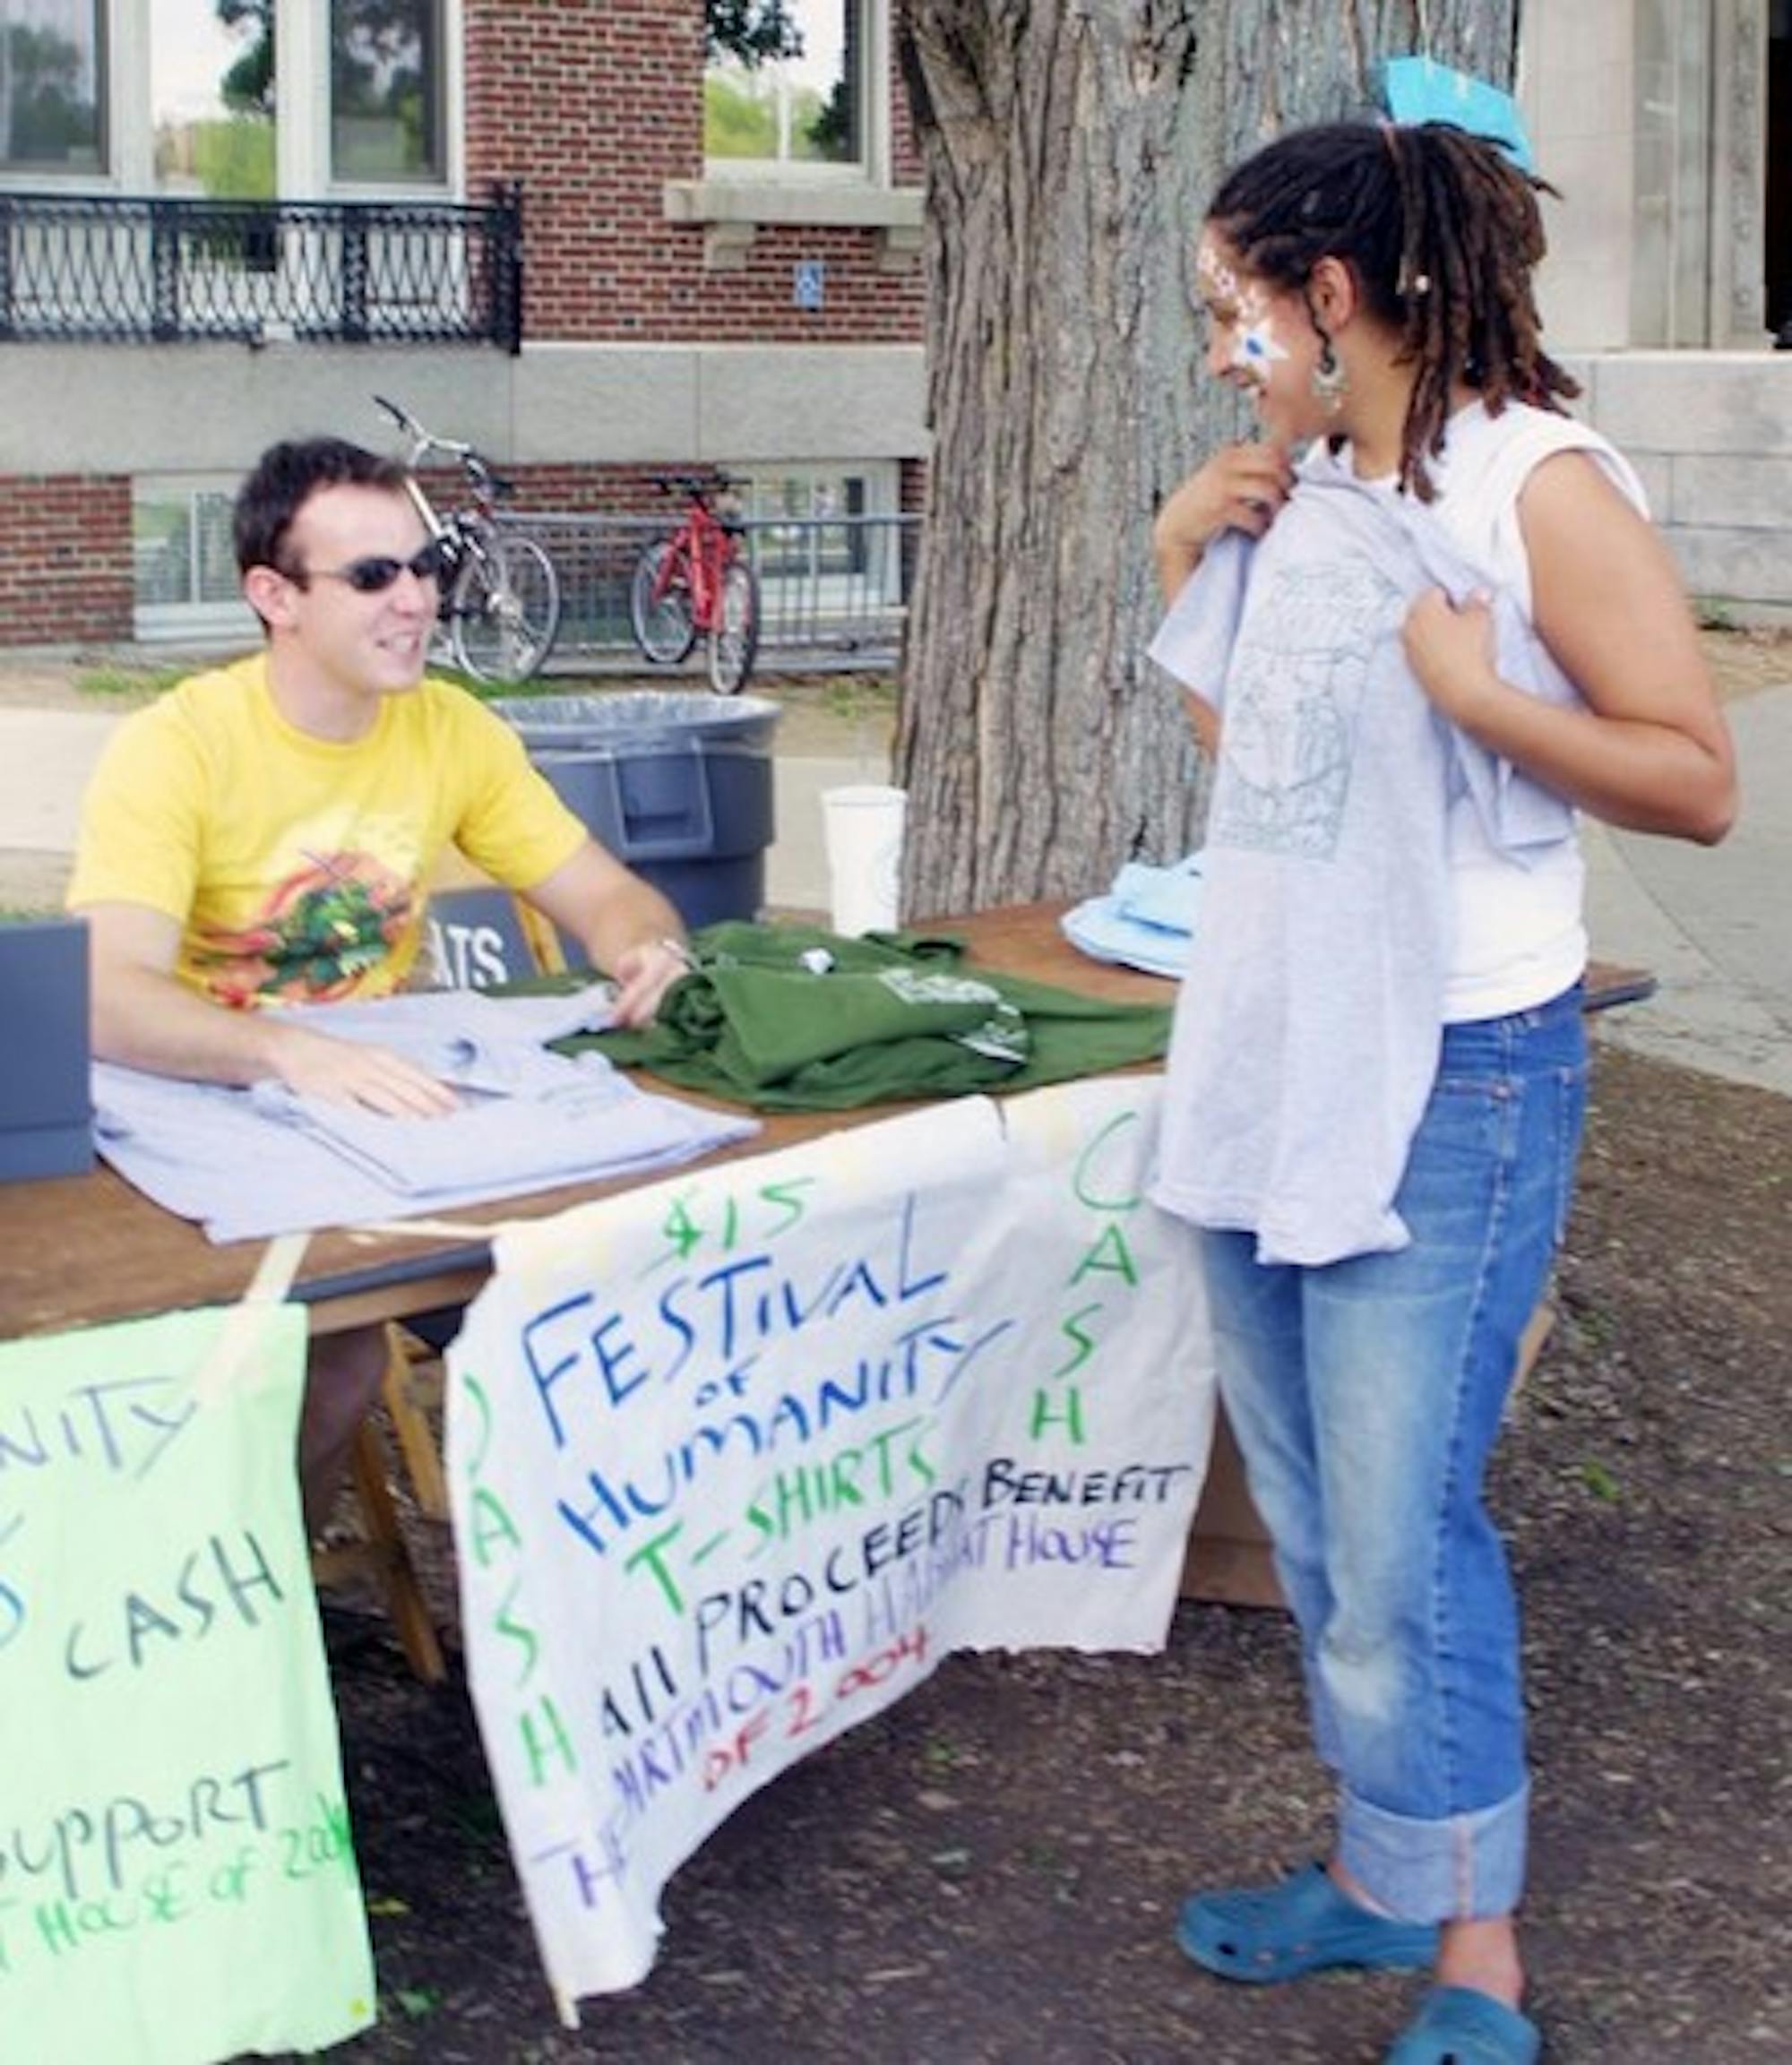 Lane Verlenden '06 sells Festival of Humanity T-shirts during the 2004 Green Key. The Festival plans to fundraise for Habitat for Humanity this year.